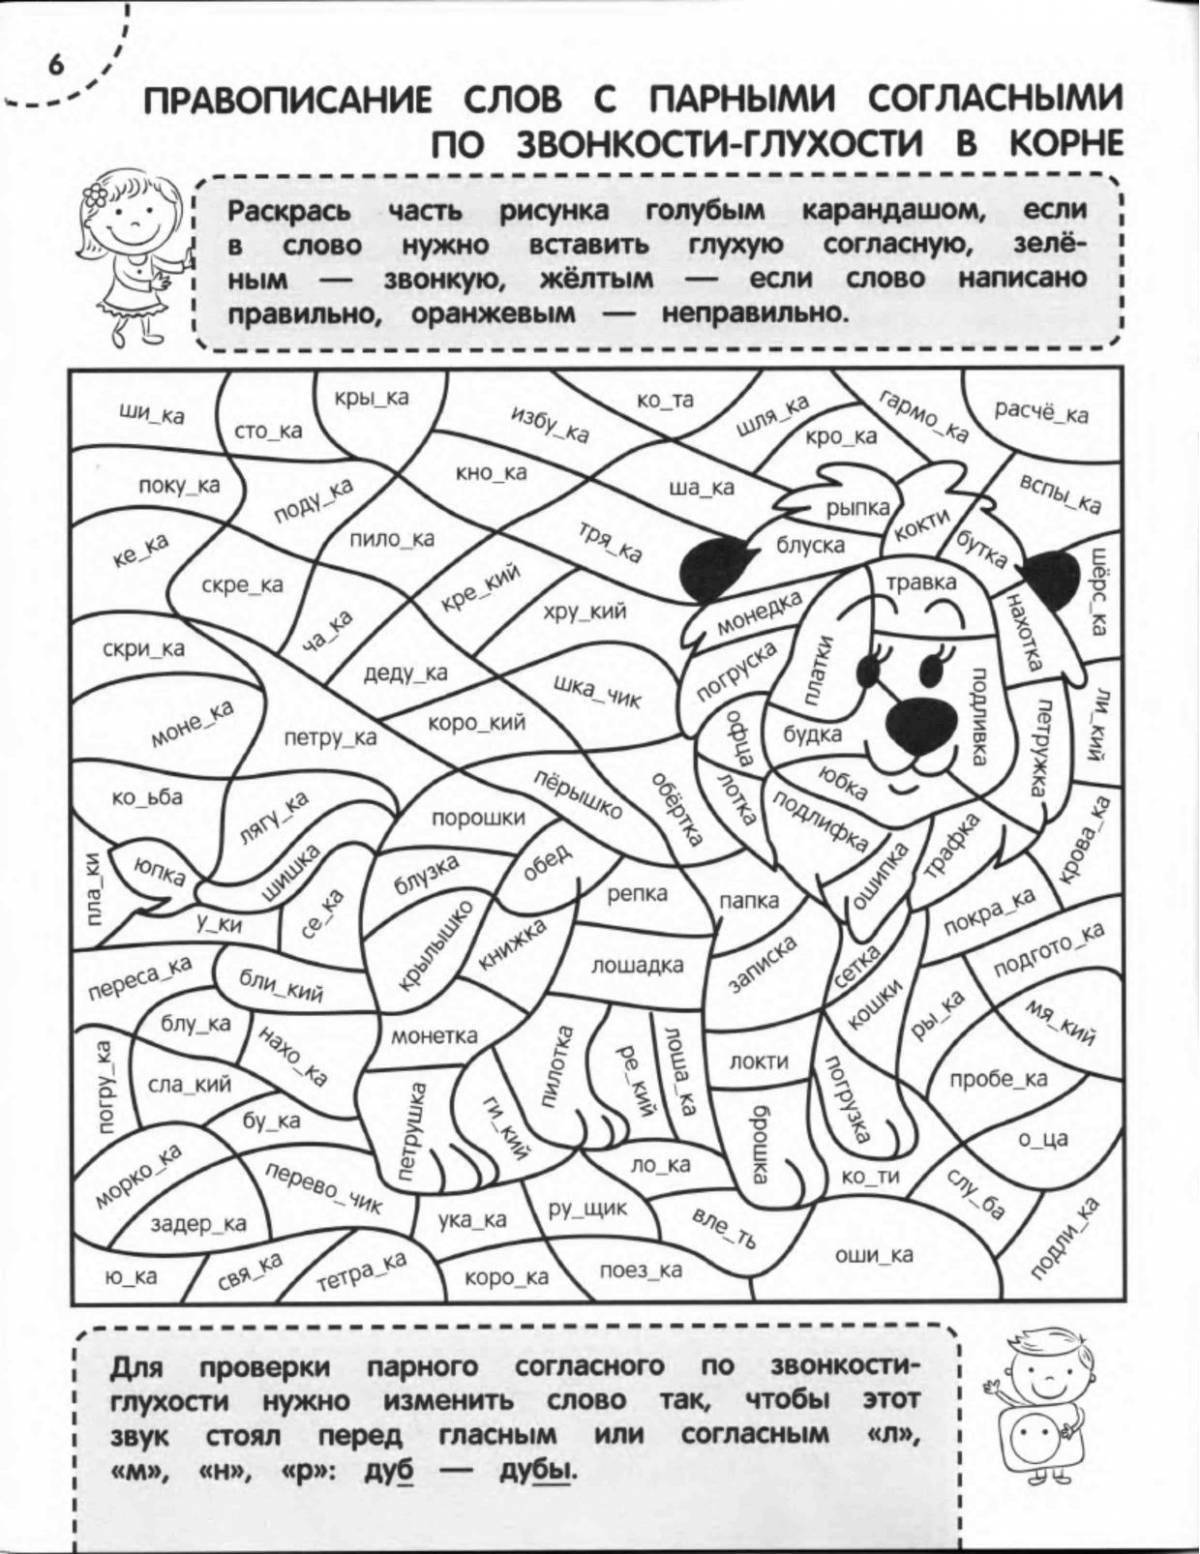 Impressive coloring write a simulator without errors Grade 3 answers